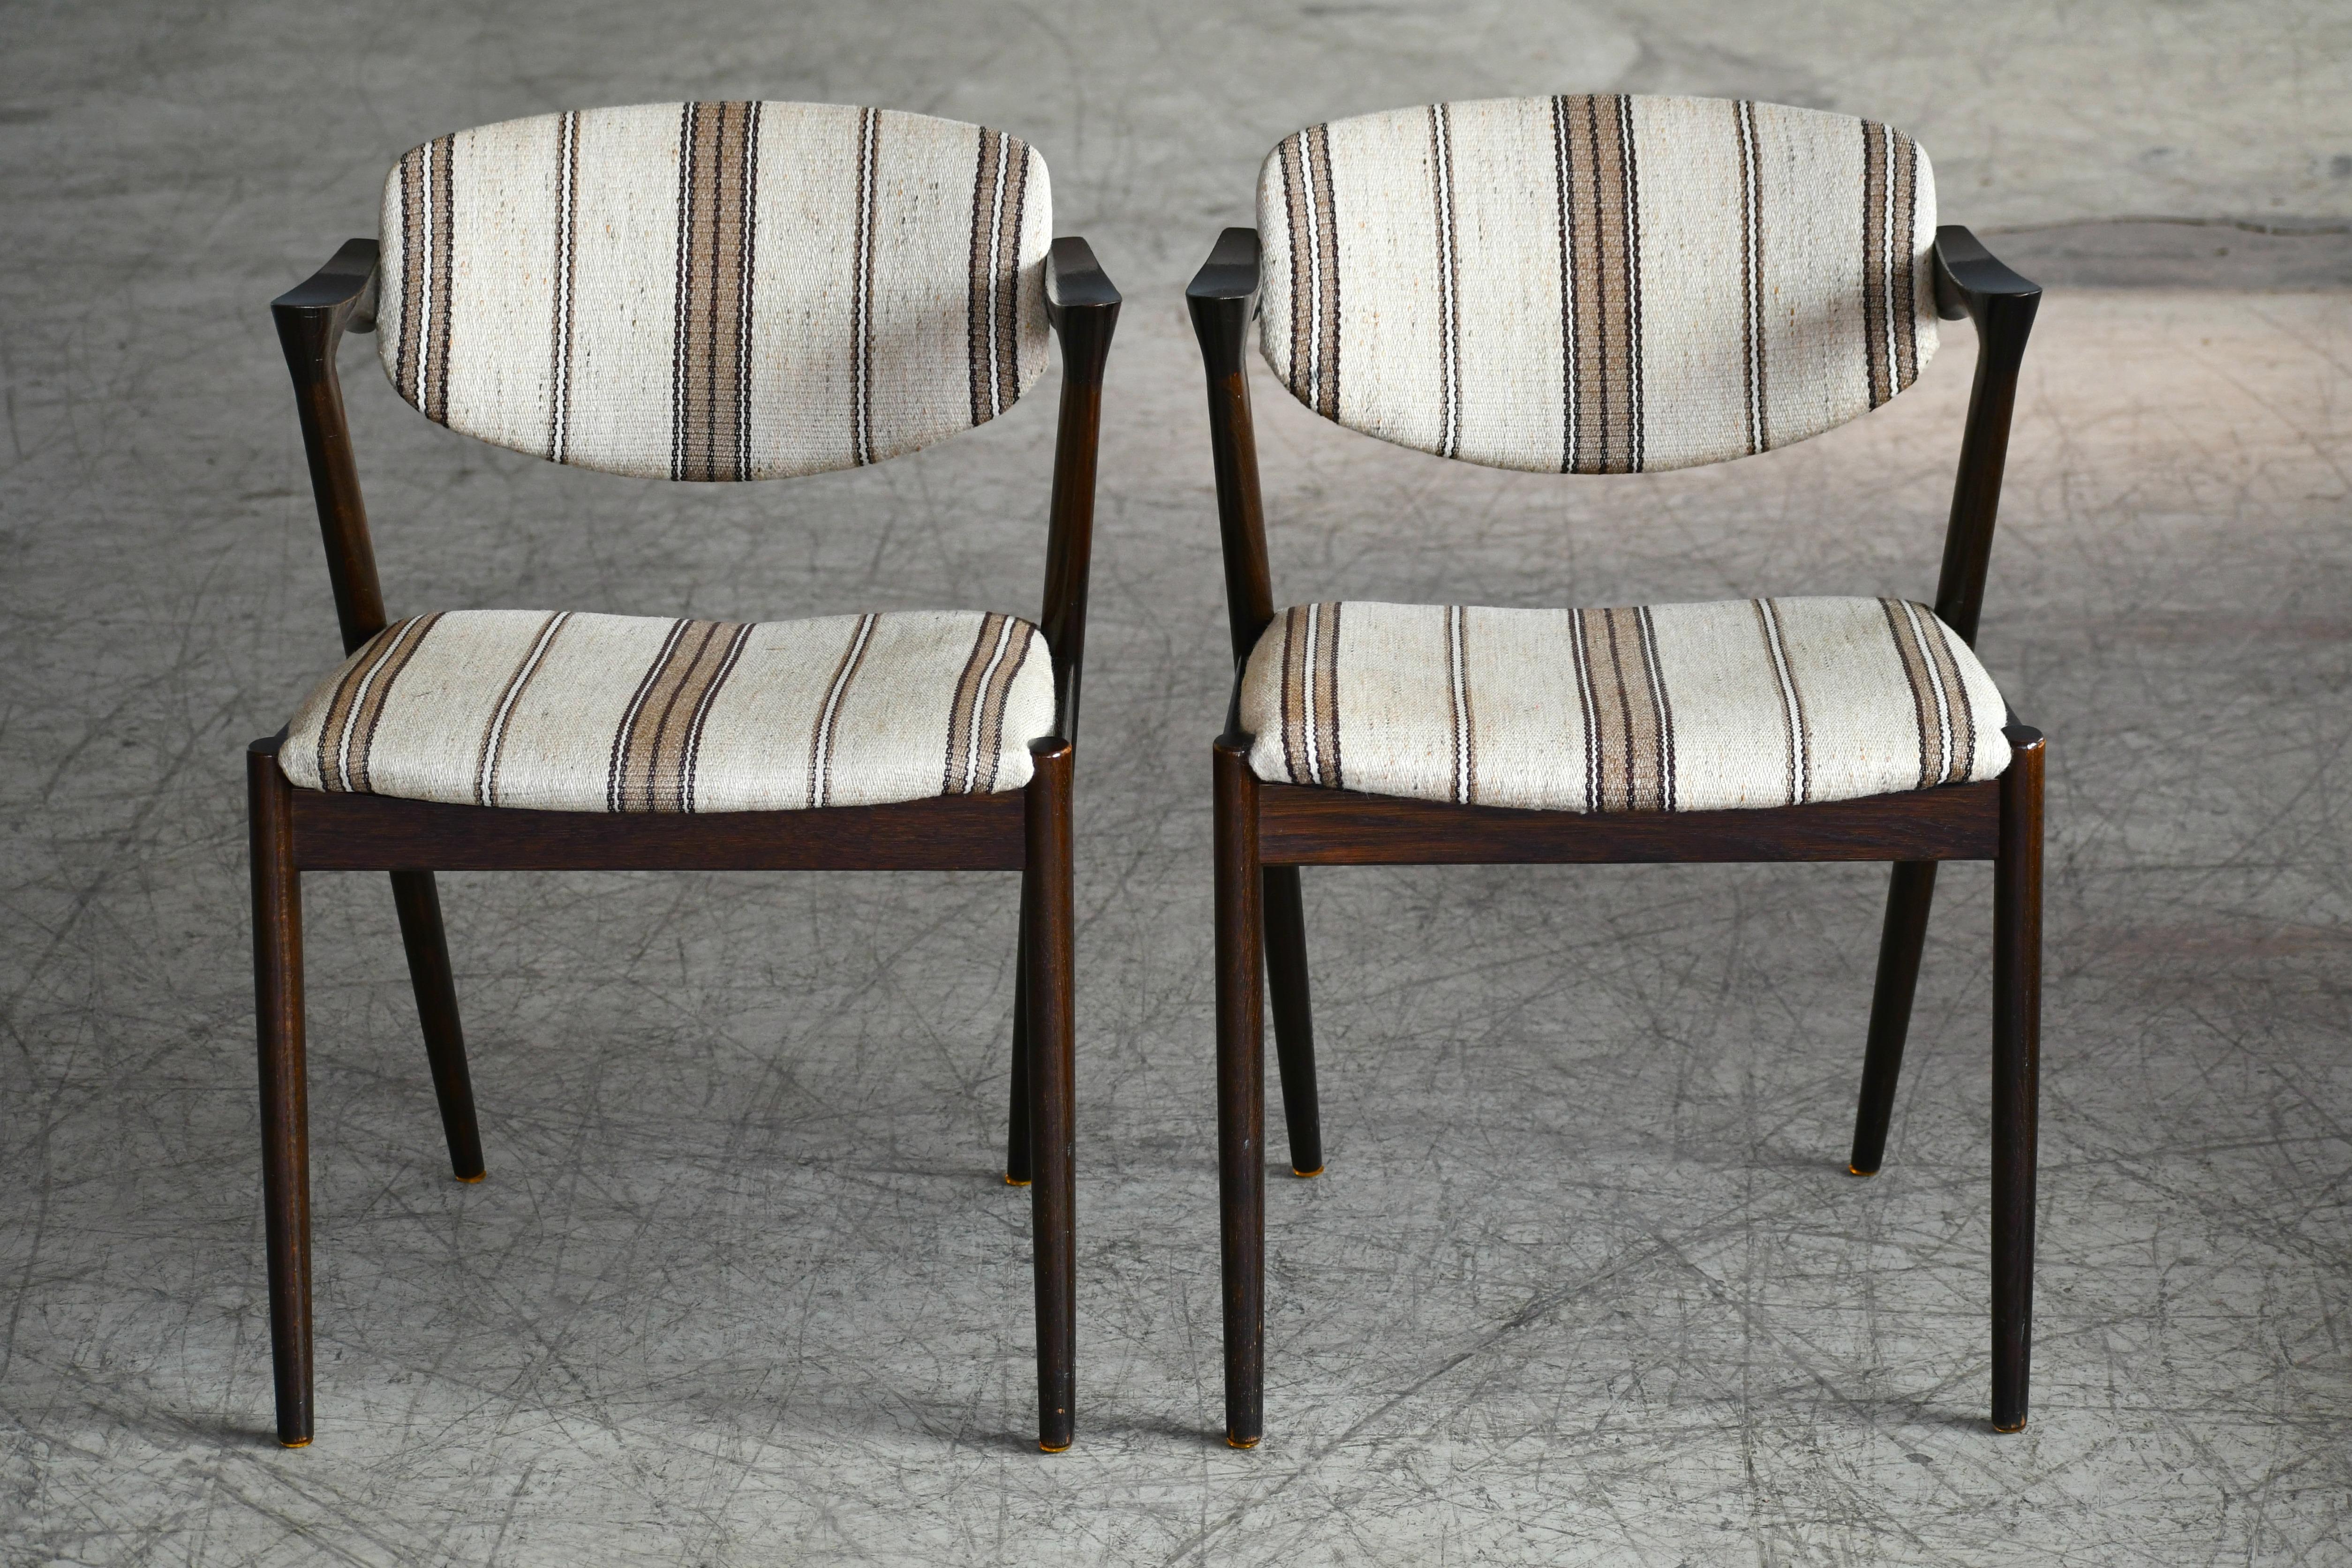 Set of Four Kai Kristiansen Model 42 Dining Chairs in Rosewood Stained Oak 1